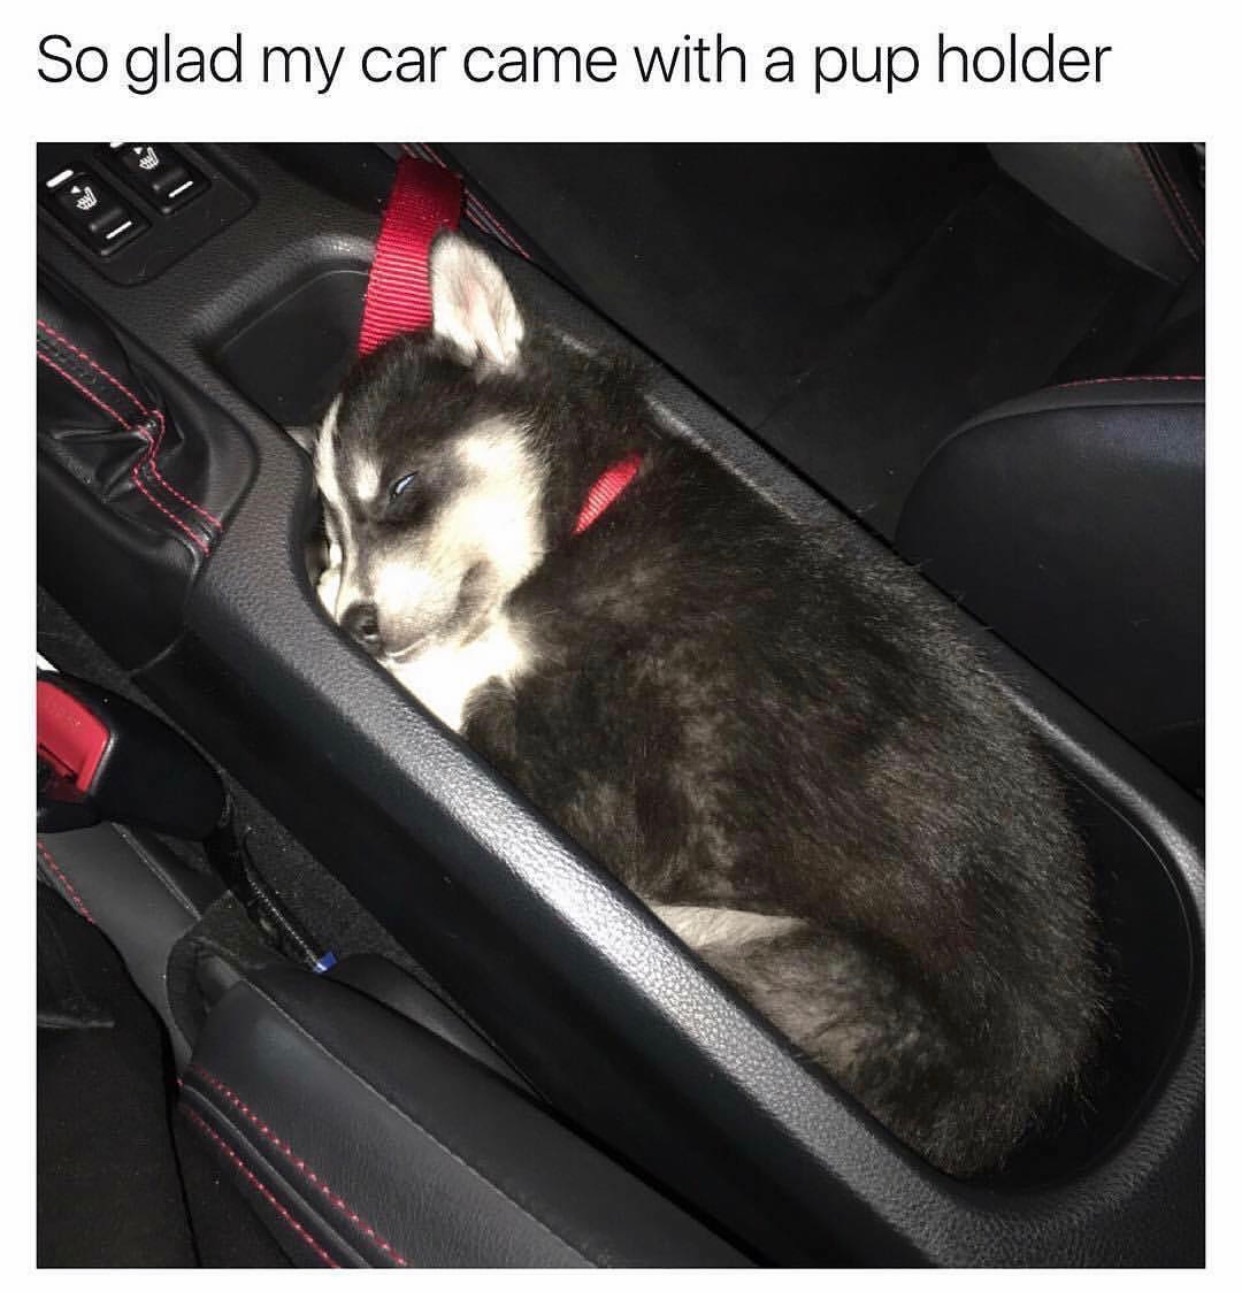 pup holder - So glad my car came with a pup holder